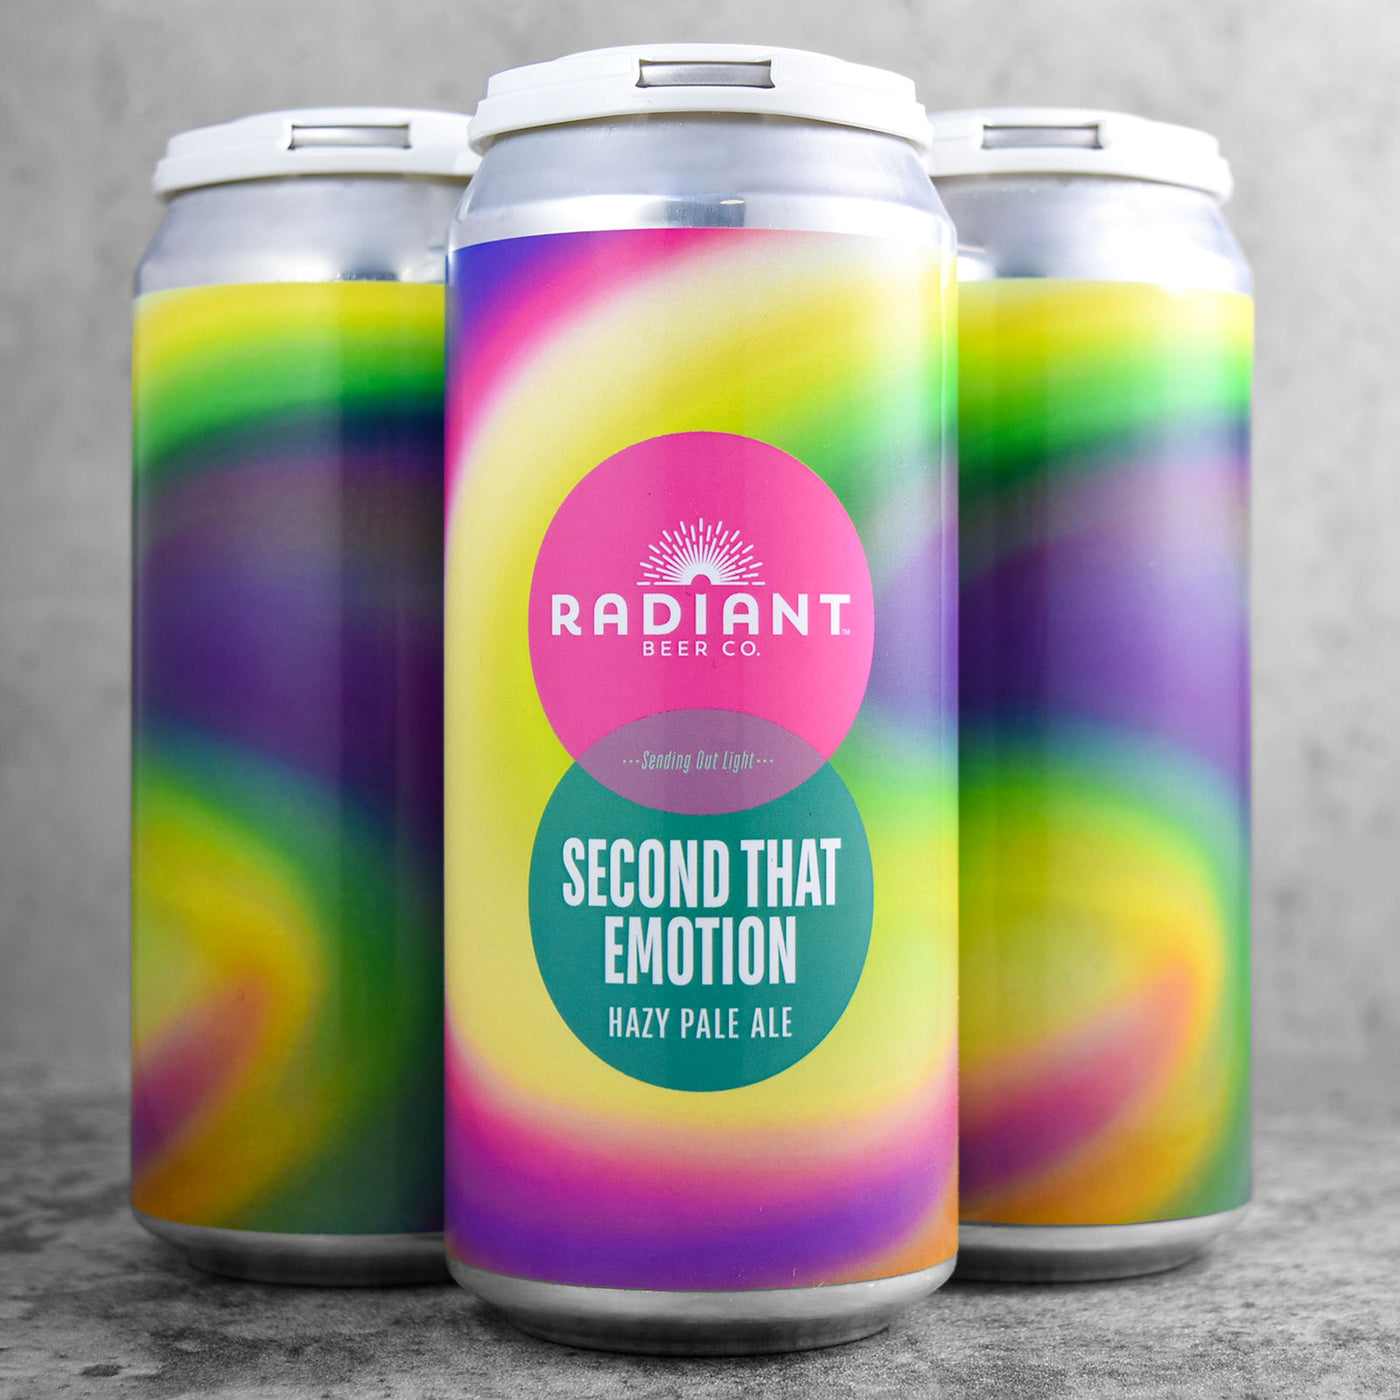 Radiant Beer Co. Second That Emotion